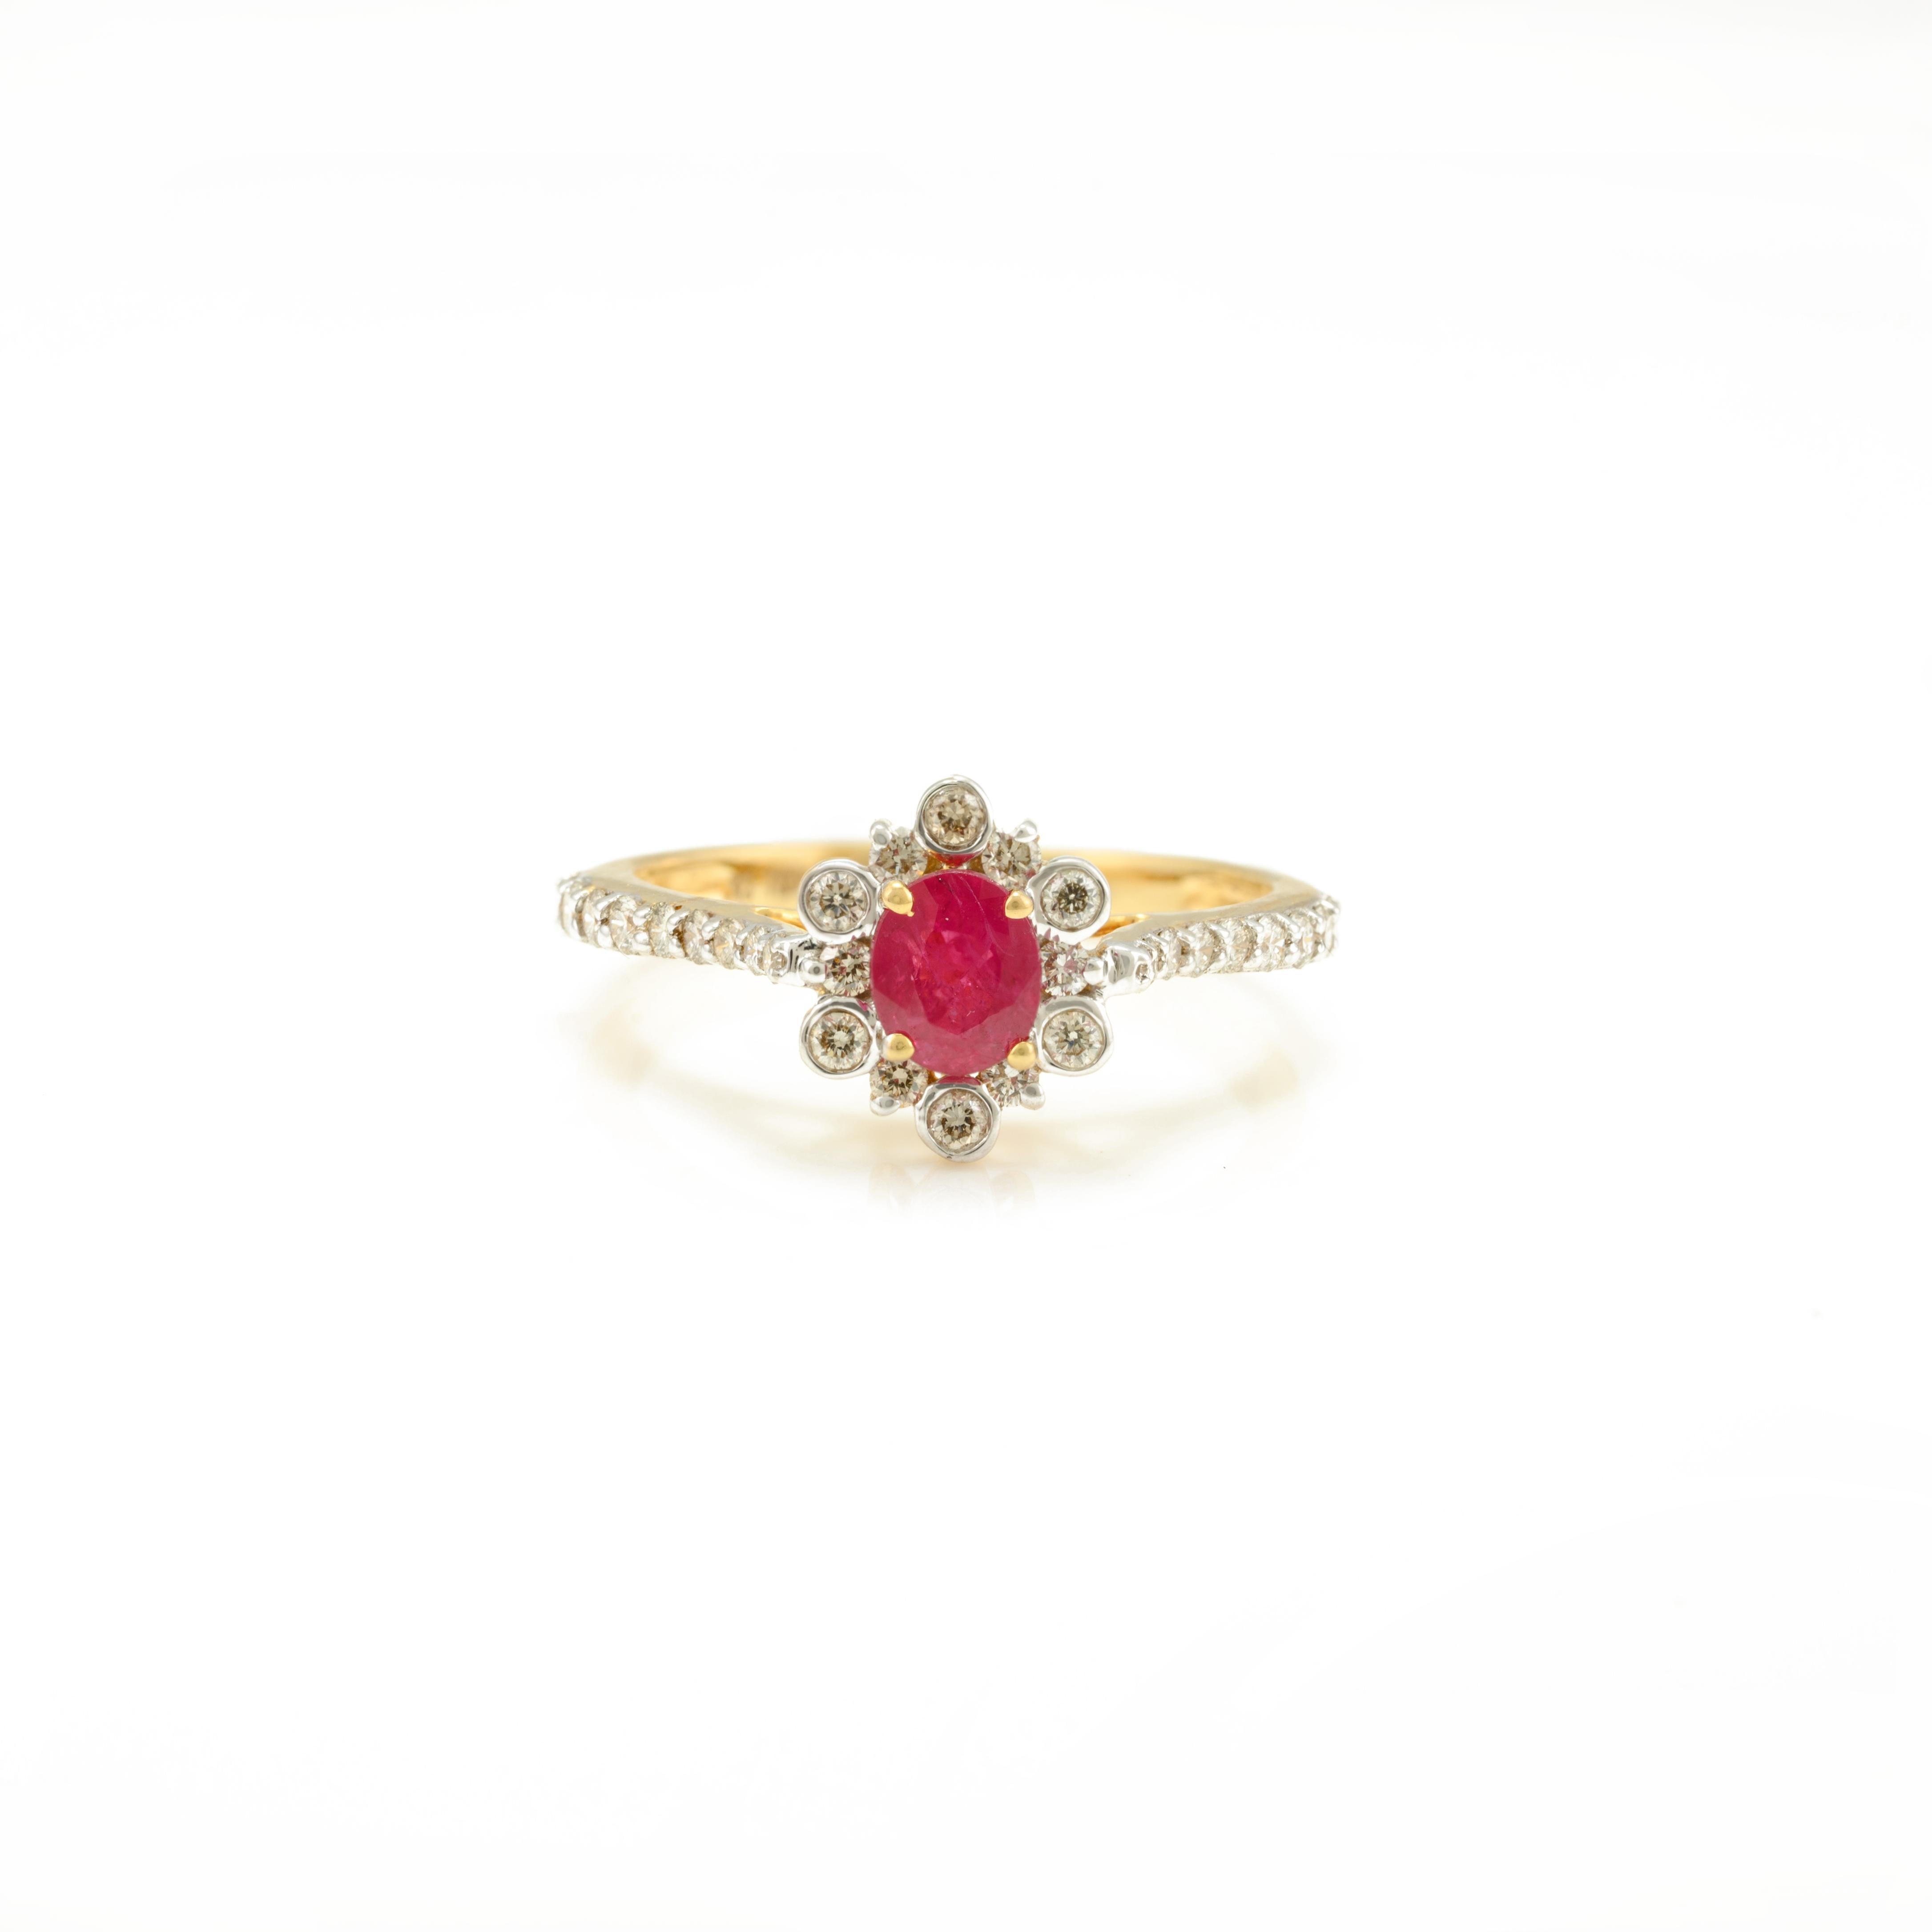 For Sale:  Contemporary Diamond and Natural Ruby Gemstone Ring in 18k Solid Yellow Gold 6